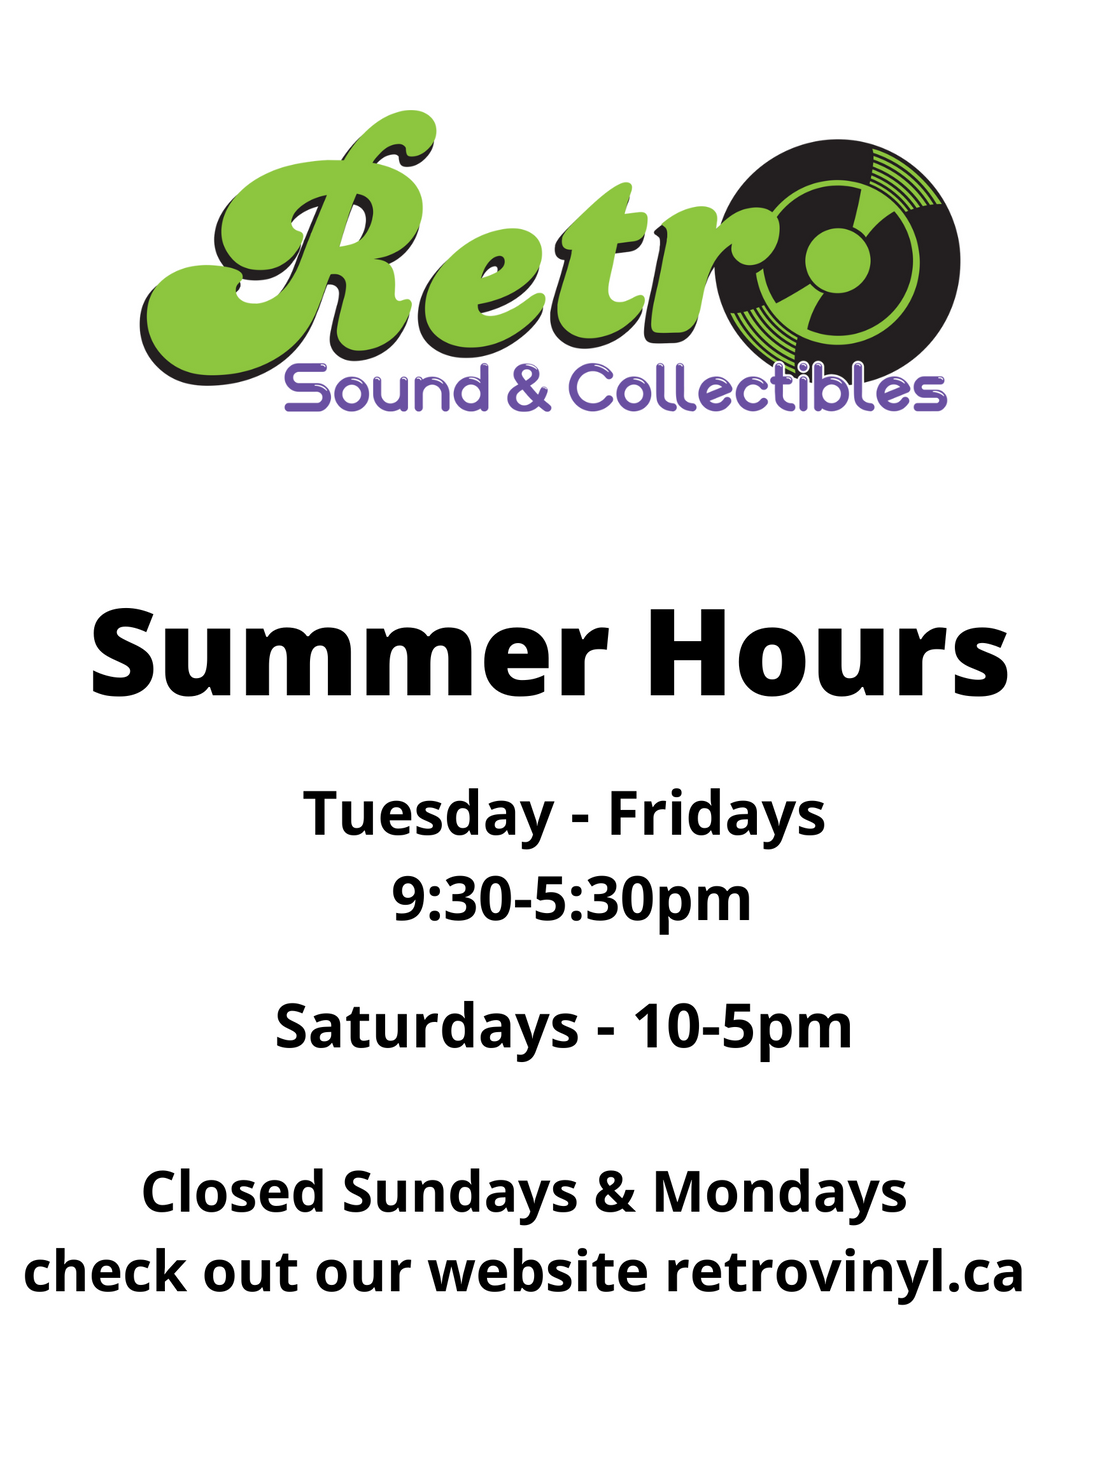 New Summer Hours & more